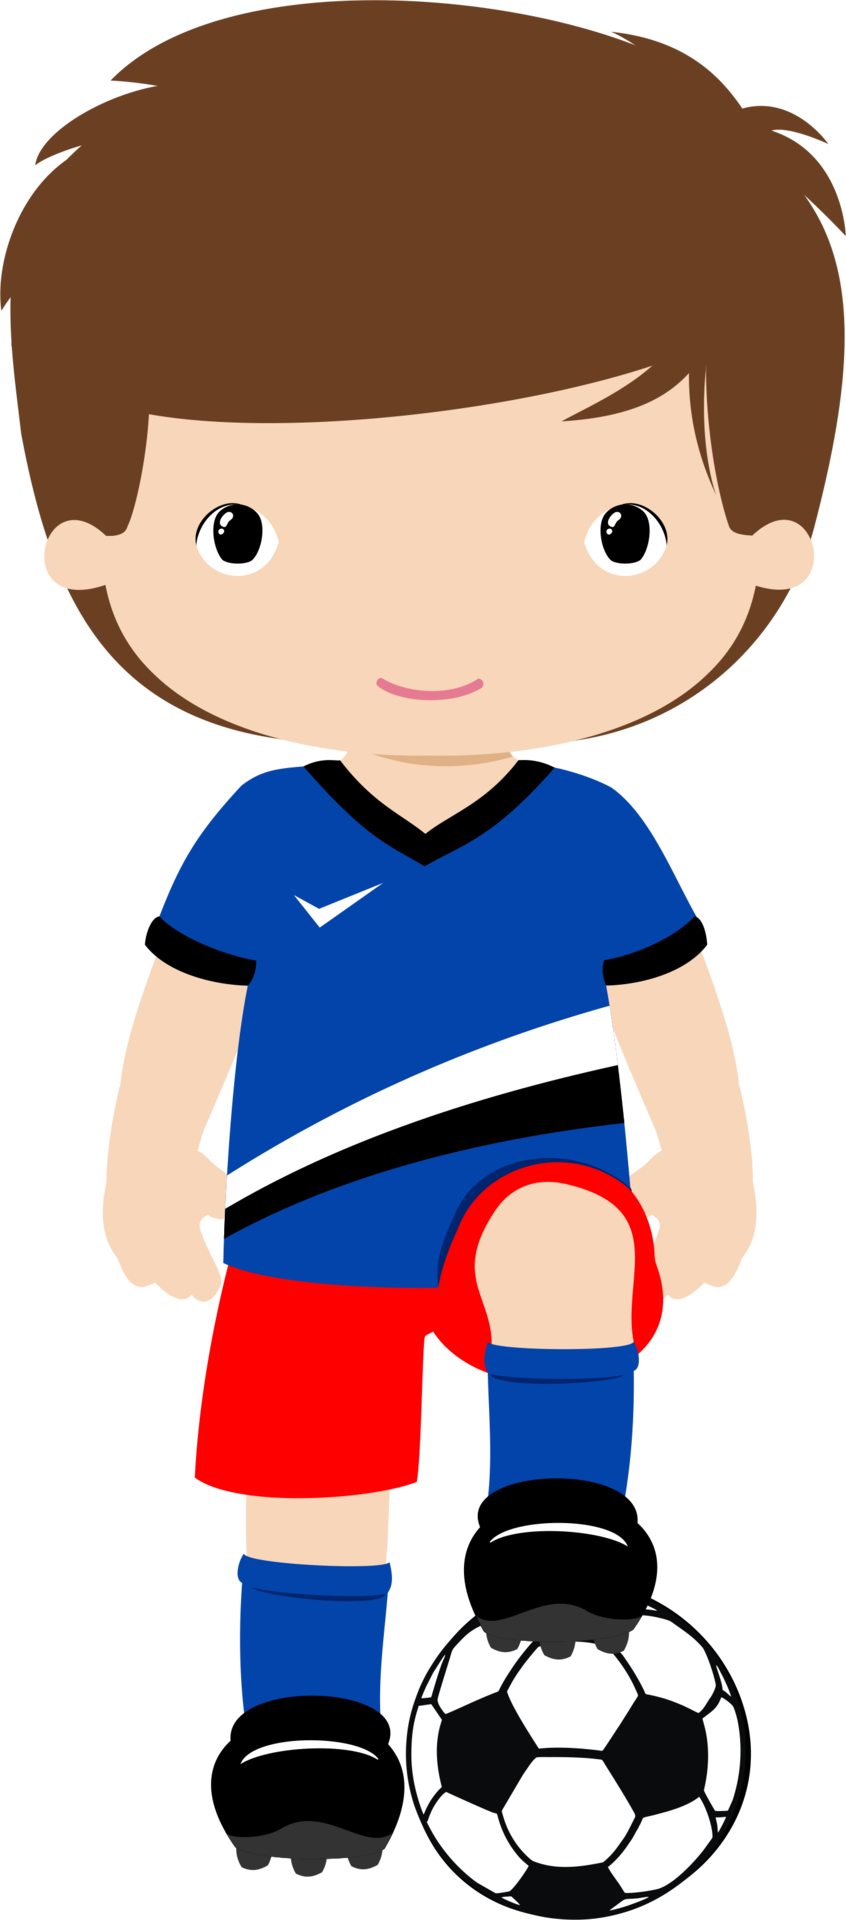 Sports gin stica futebol. Young clipart infant toddler